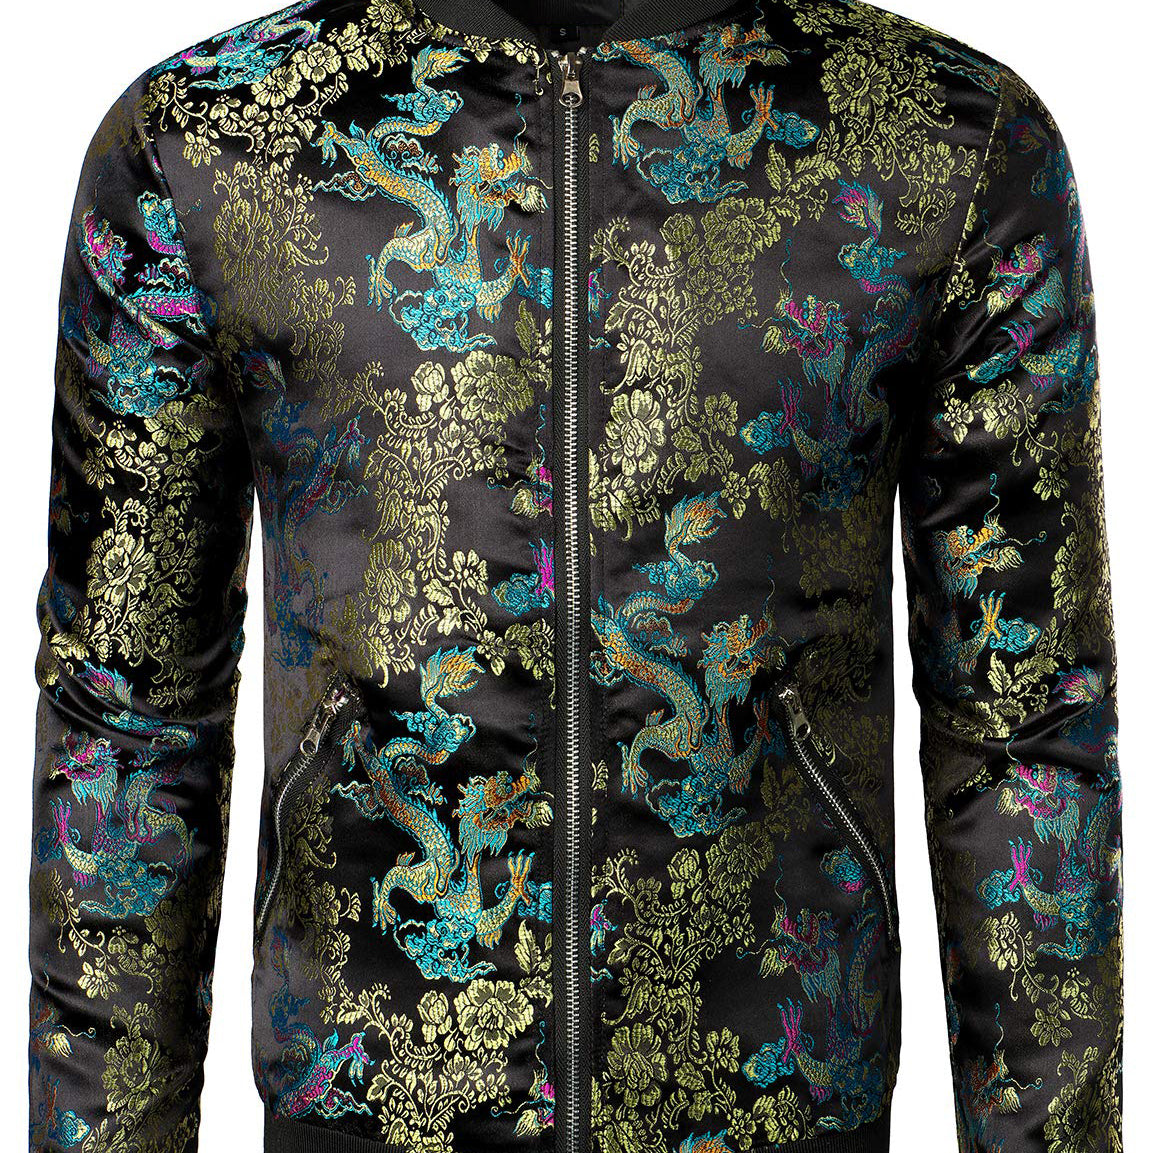 Men's Outdoor Embroidered Satin Bomber Jacket